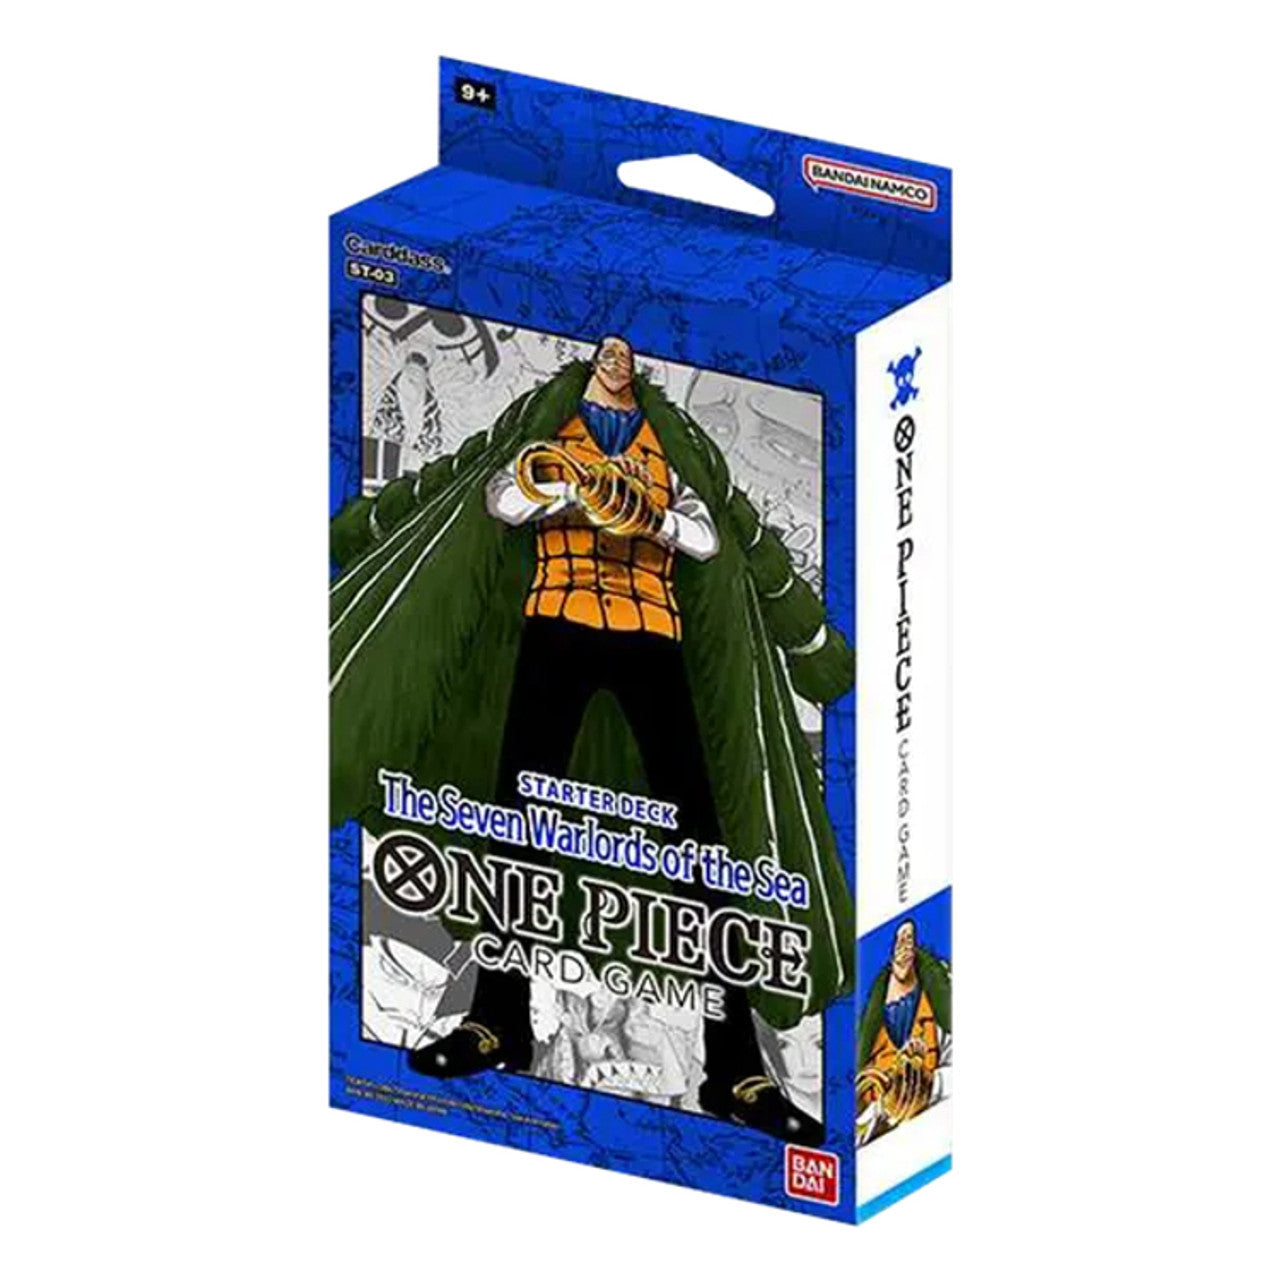 ONE PIECE CARD GAME: [ST-03] THE SEVEN WARLORDSD OF THE SEA - Dark Ninja Gaming LA